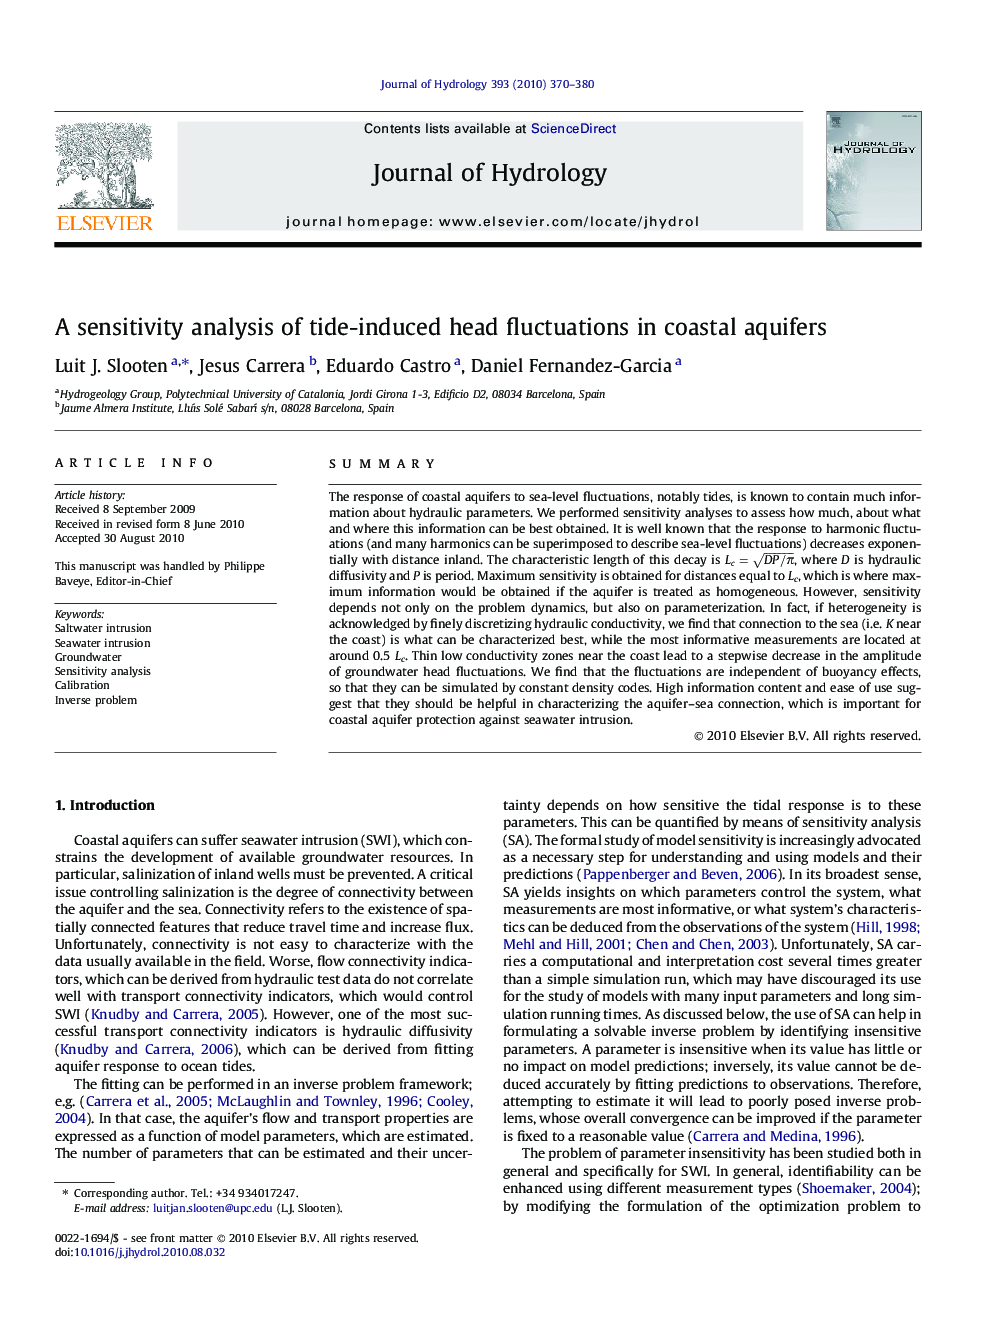 A sensitivity analysis of tide-induced head fluctuations in coastal aquifers